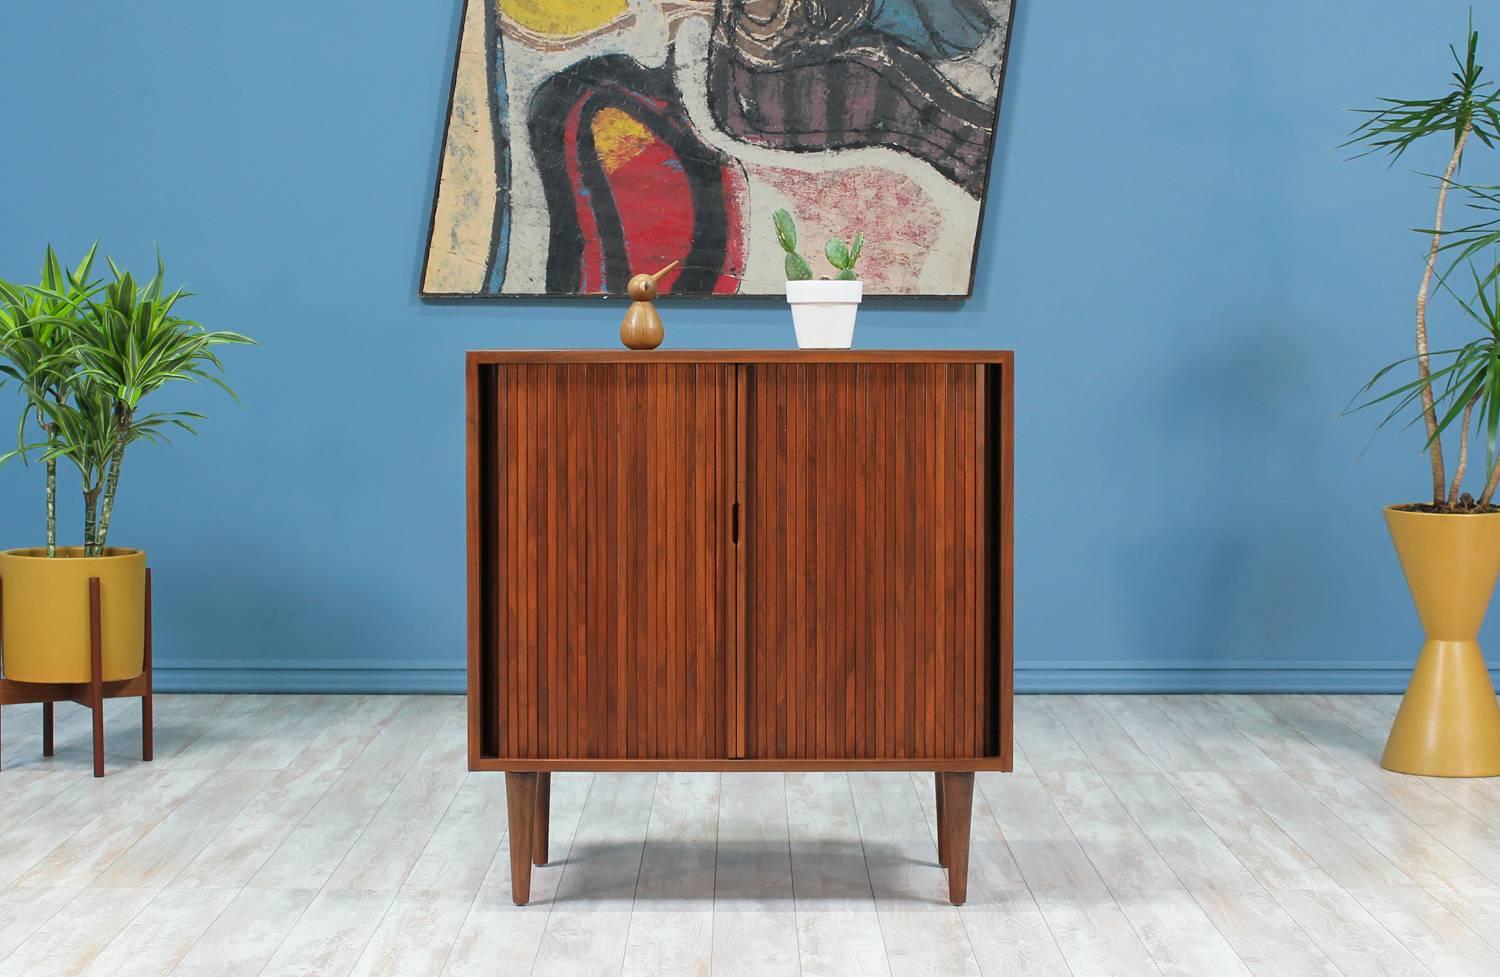 Mid Century Modern Cabinet designed by Milo Baughman for Glenn of California in the United States circa 1950’s. This compact cabinet is made of walnut wood and features two tambour doors with recessed pulls that reveal a shelved interior.